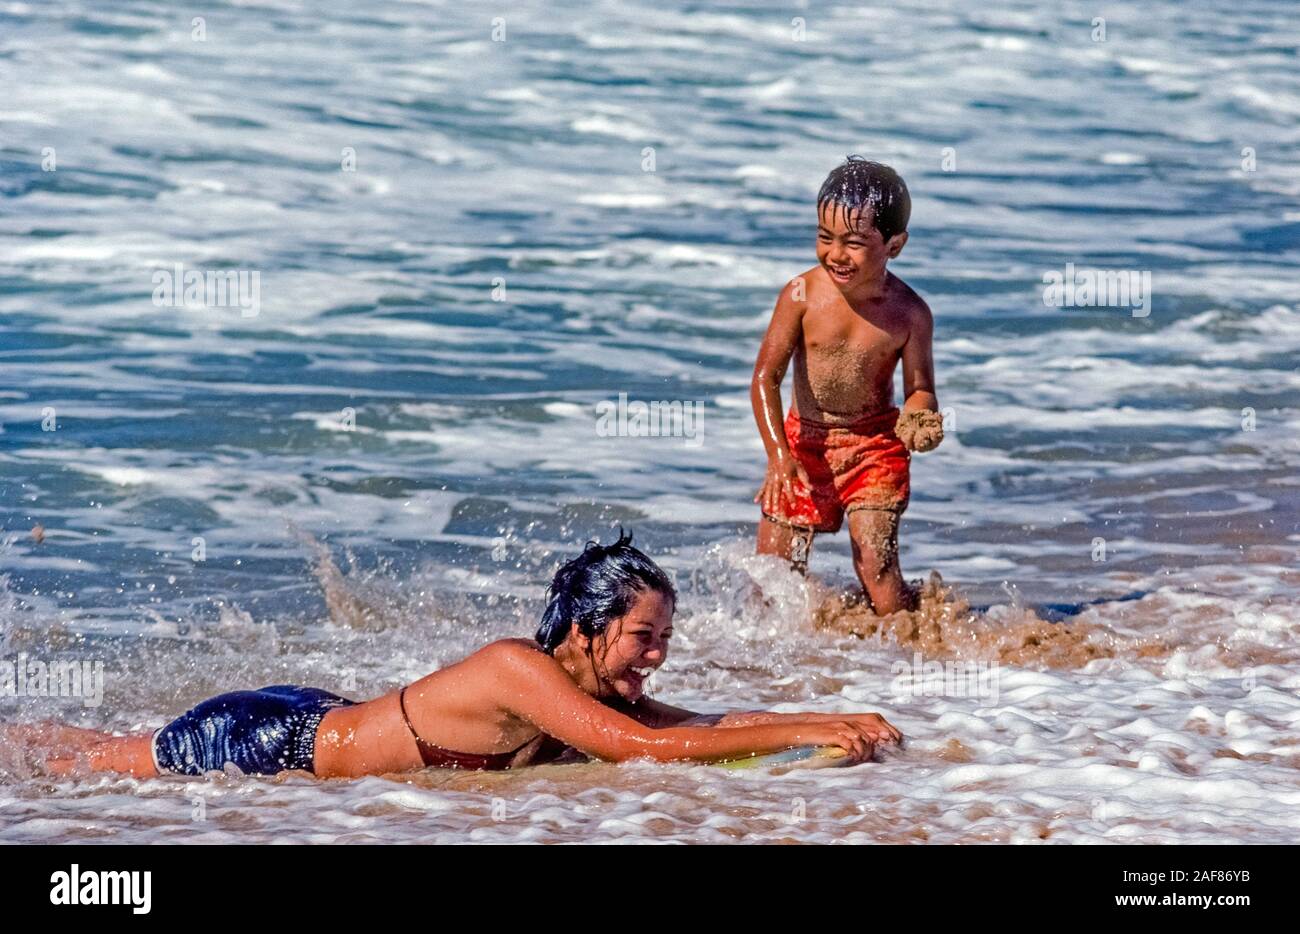 Two Native Hawaiian children play in the sandy Pacific Ocean surf along the shore of Molokai Island in Hawaii, USA. The young boy is ready to throw a handful of wet sand at his sister who is floating in the water on a skimboard. Molokai is the fifth largest of eight major islands in the Aloha State but a lesser known tourist destination. A major attraction for adventurous travelers is a mule ride down steep seaside cliffs to visit the isolated site of a 19th-Century leper colony on Molokai's rugged northern coast. Stock Photo